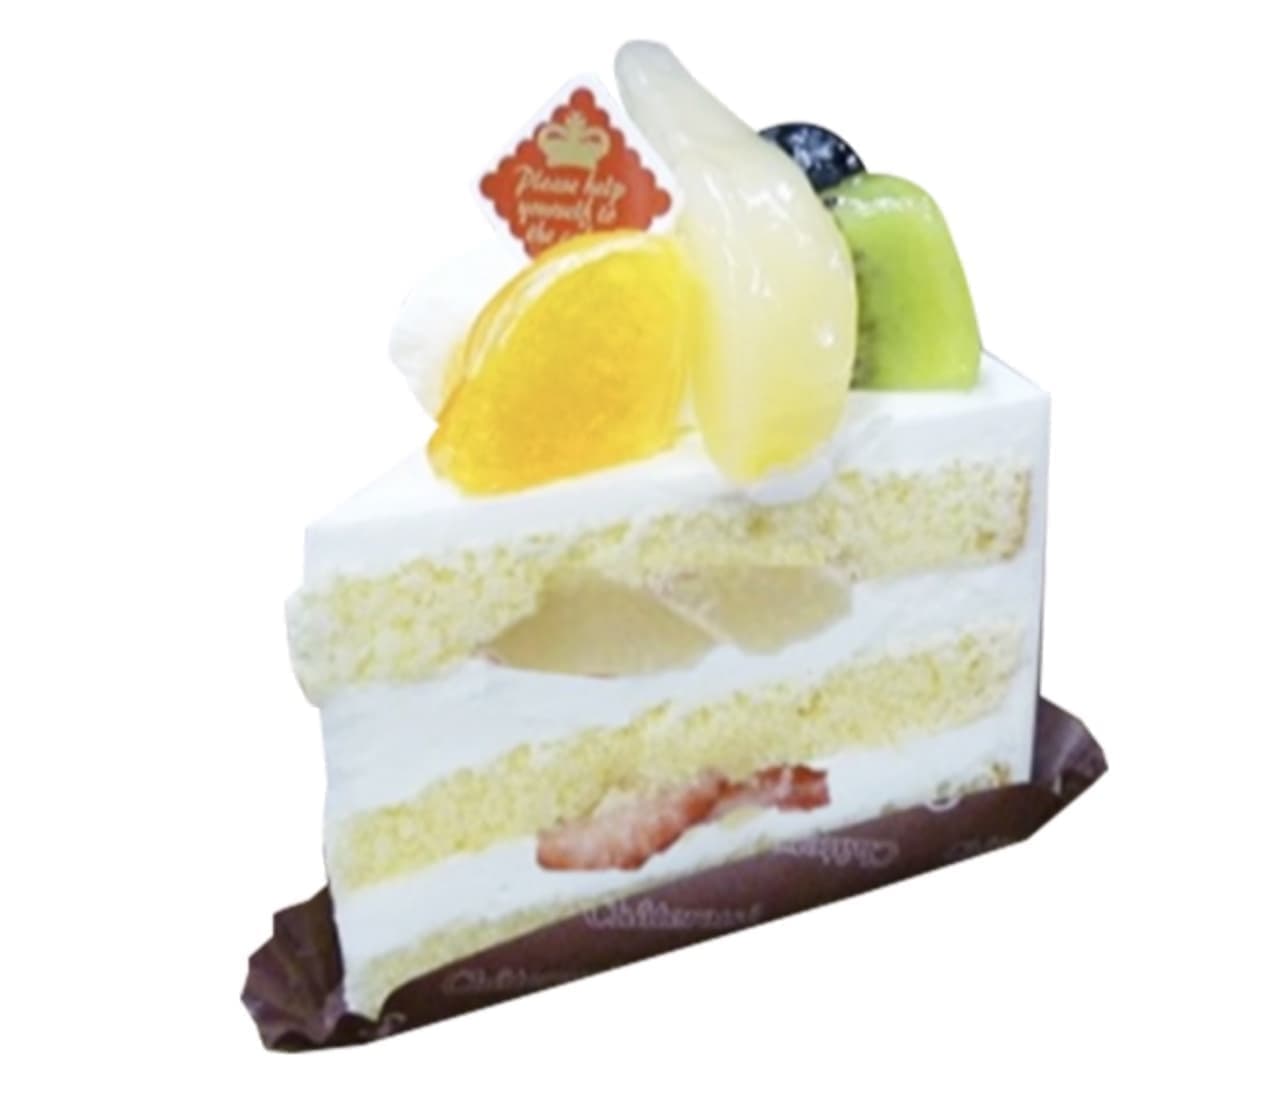 Chateraise "Premium Pure Fresh Cream Shortcake with Pears and Fruits